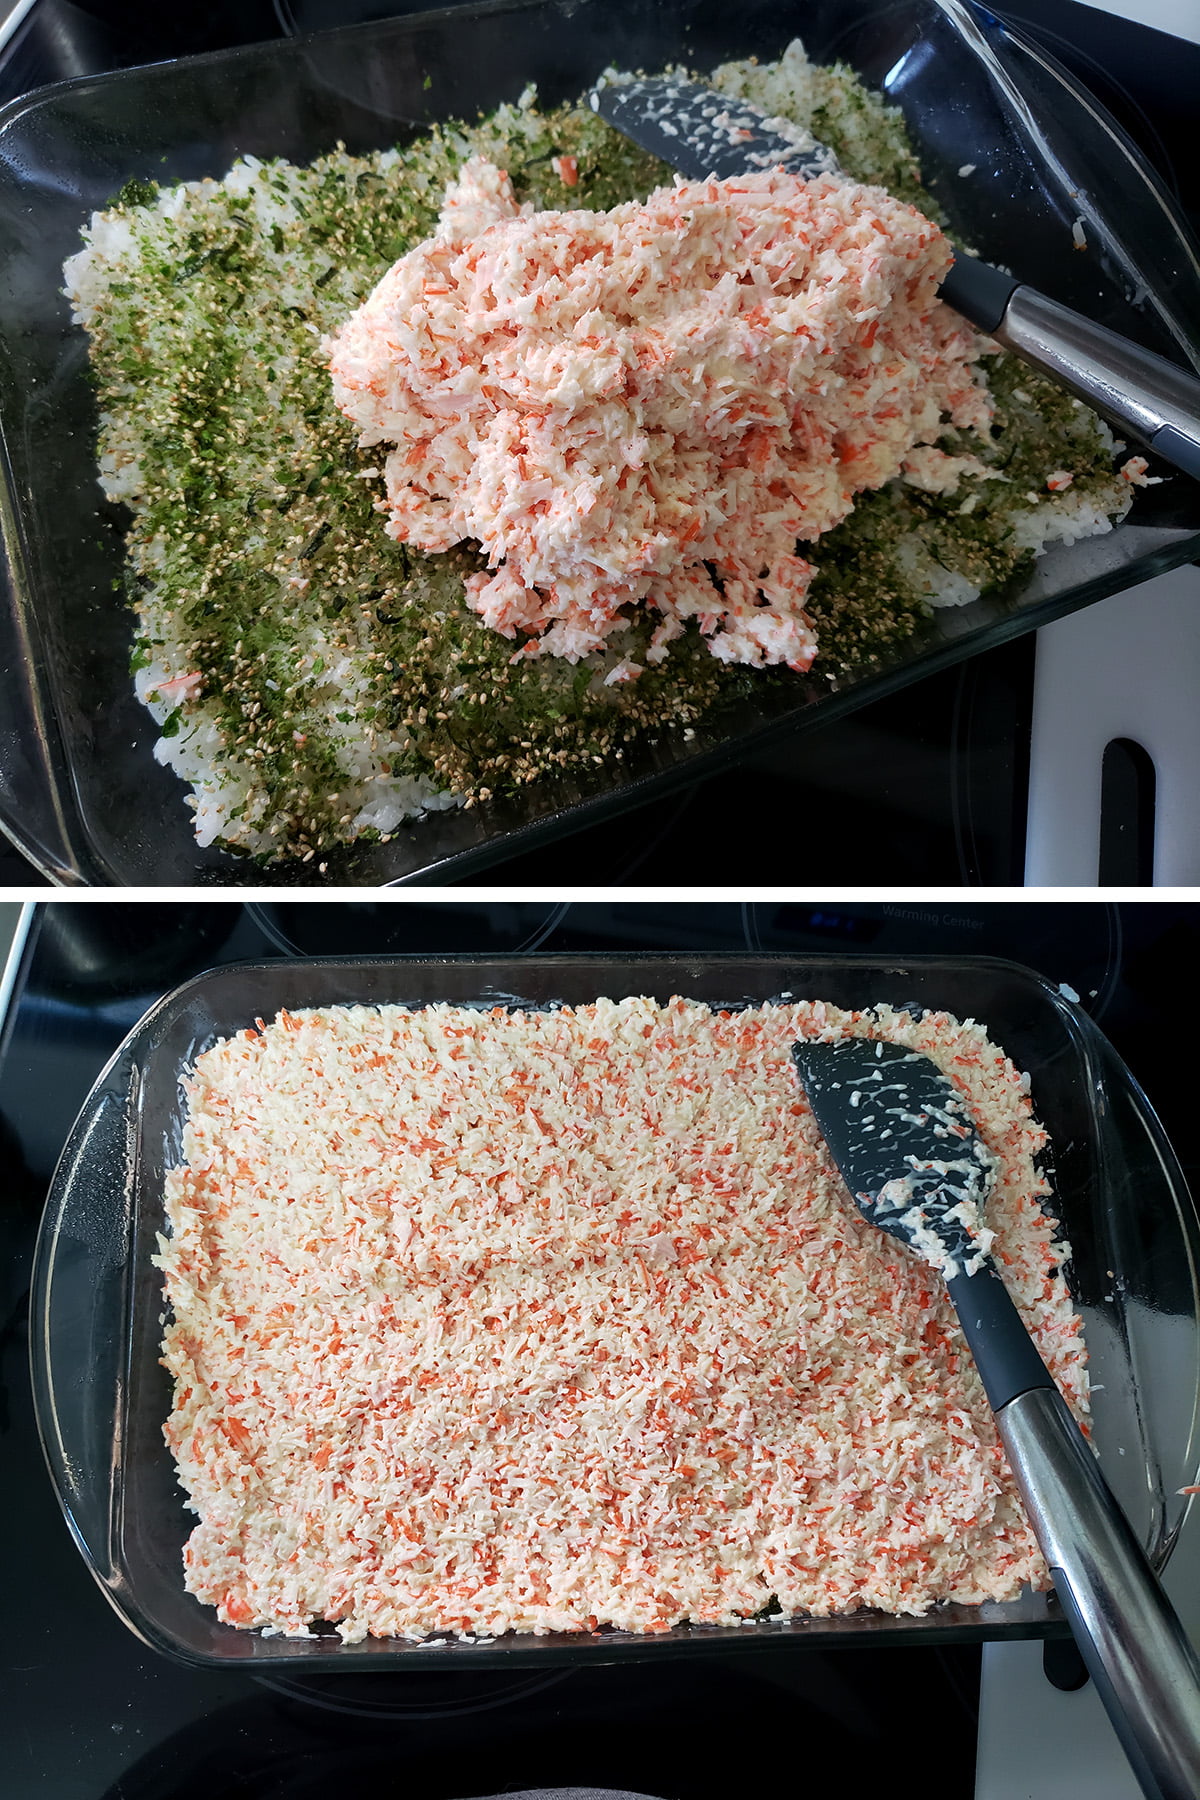 A two part compilation image showing the crab mixture being spread over the rice and furikake layers in a 9 x 13 glass baking dish.